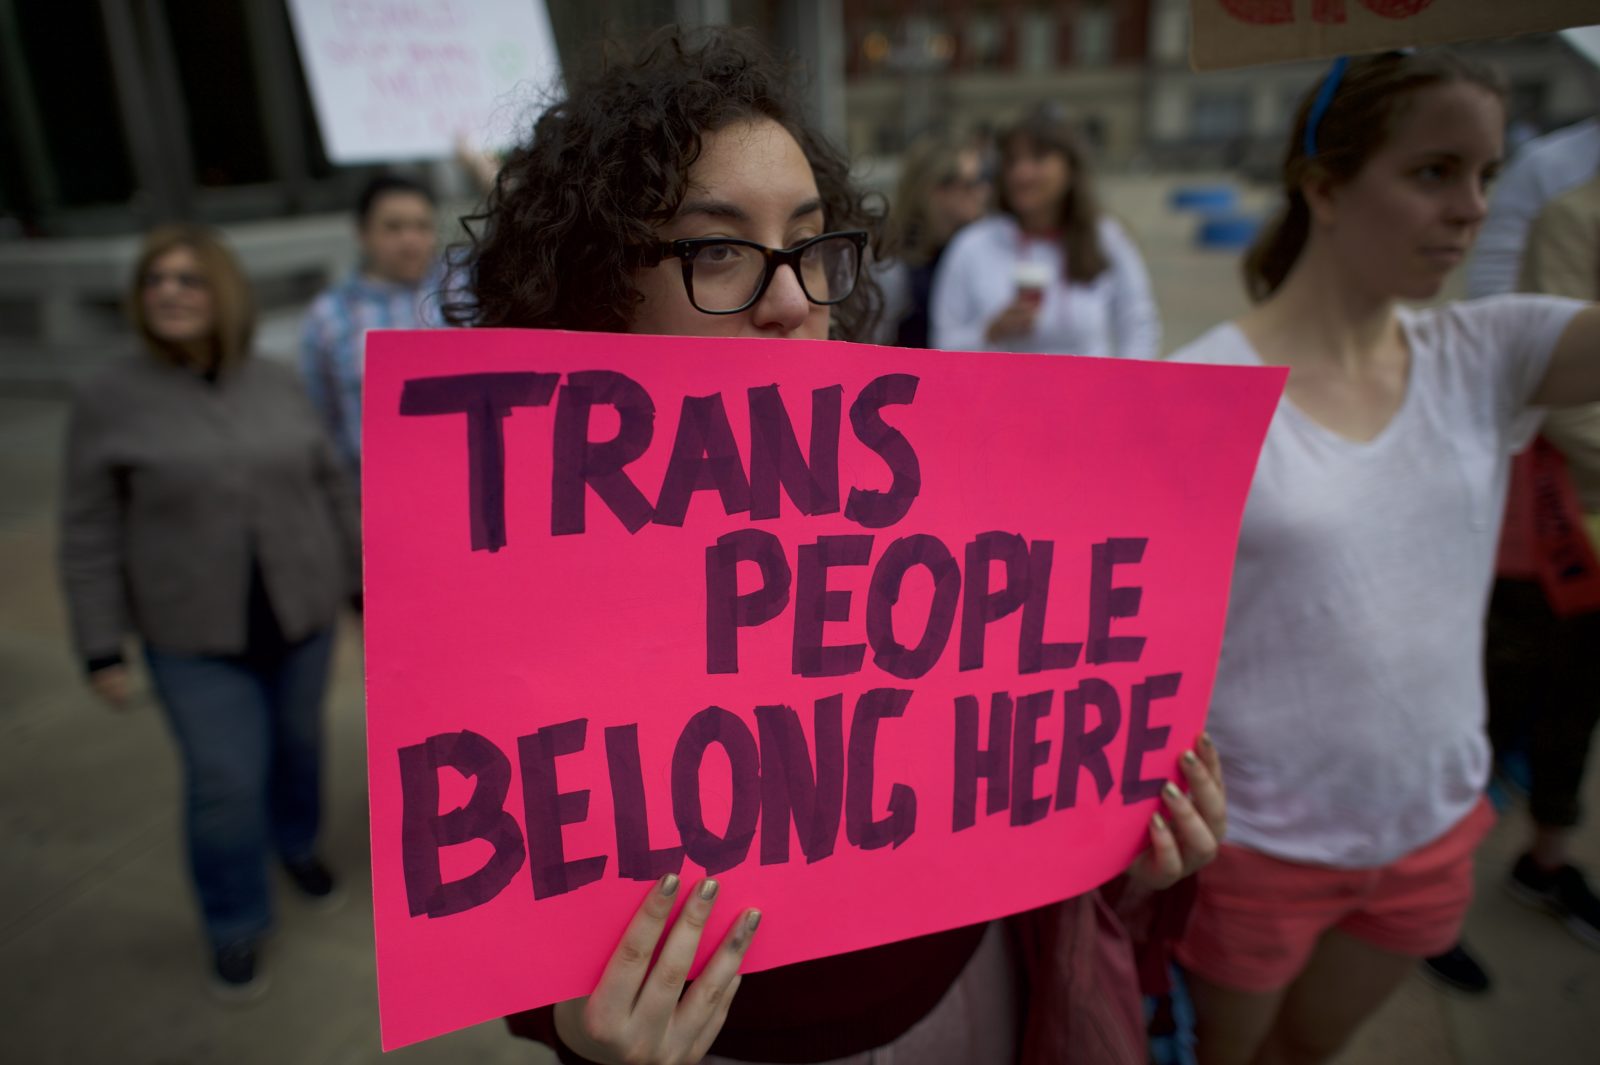 Shemale: Why you should never use this anti-trans slur